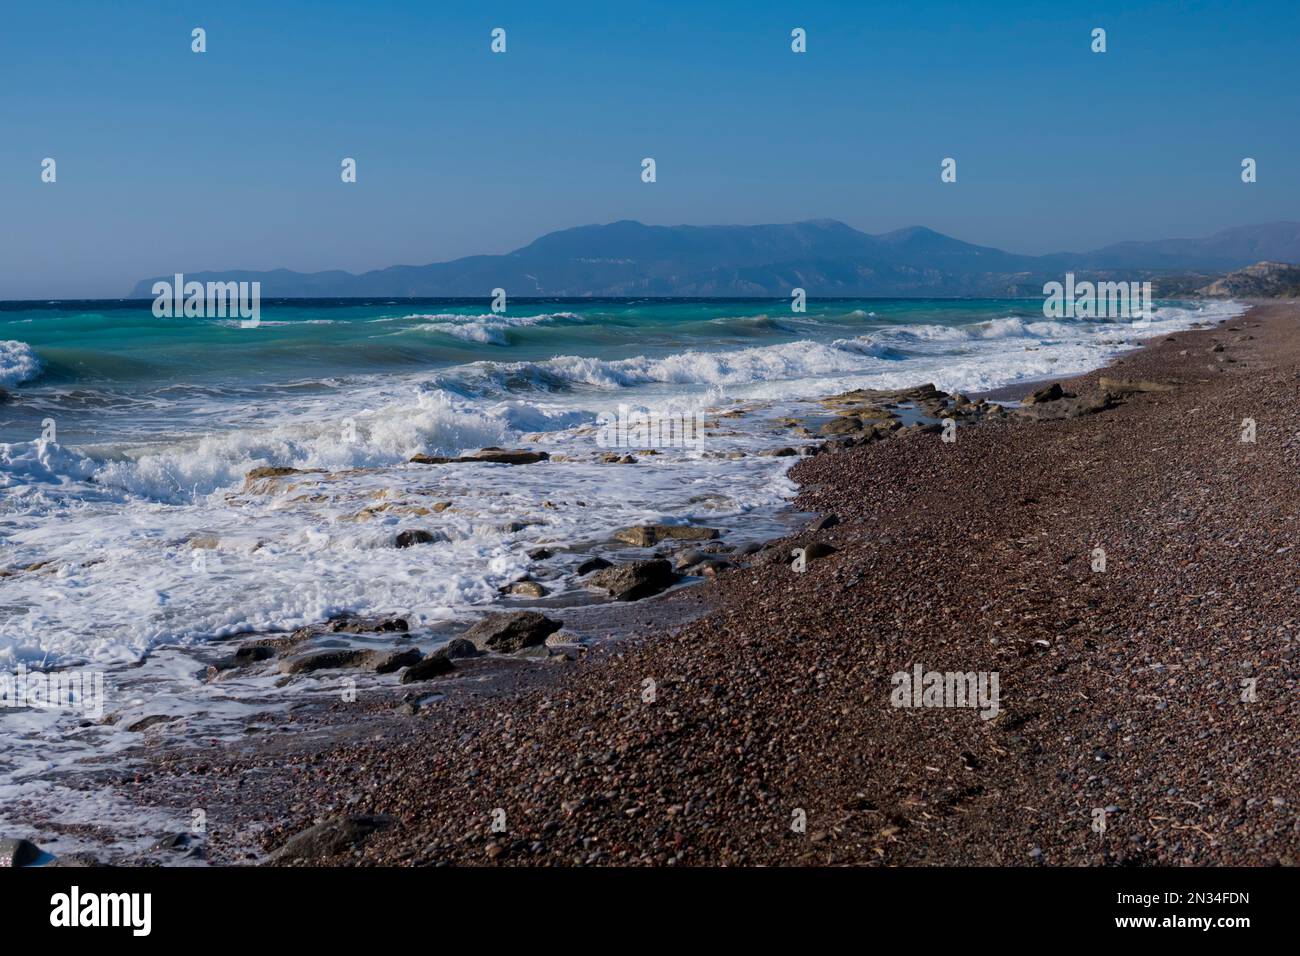 Landscape of an east shore of Rhodes Island in Greece with rocky beach and big waves Stock Photo